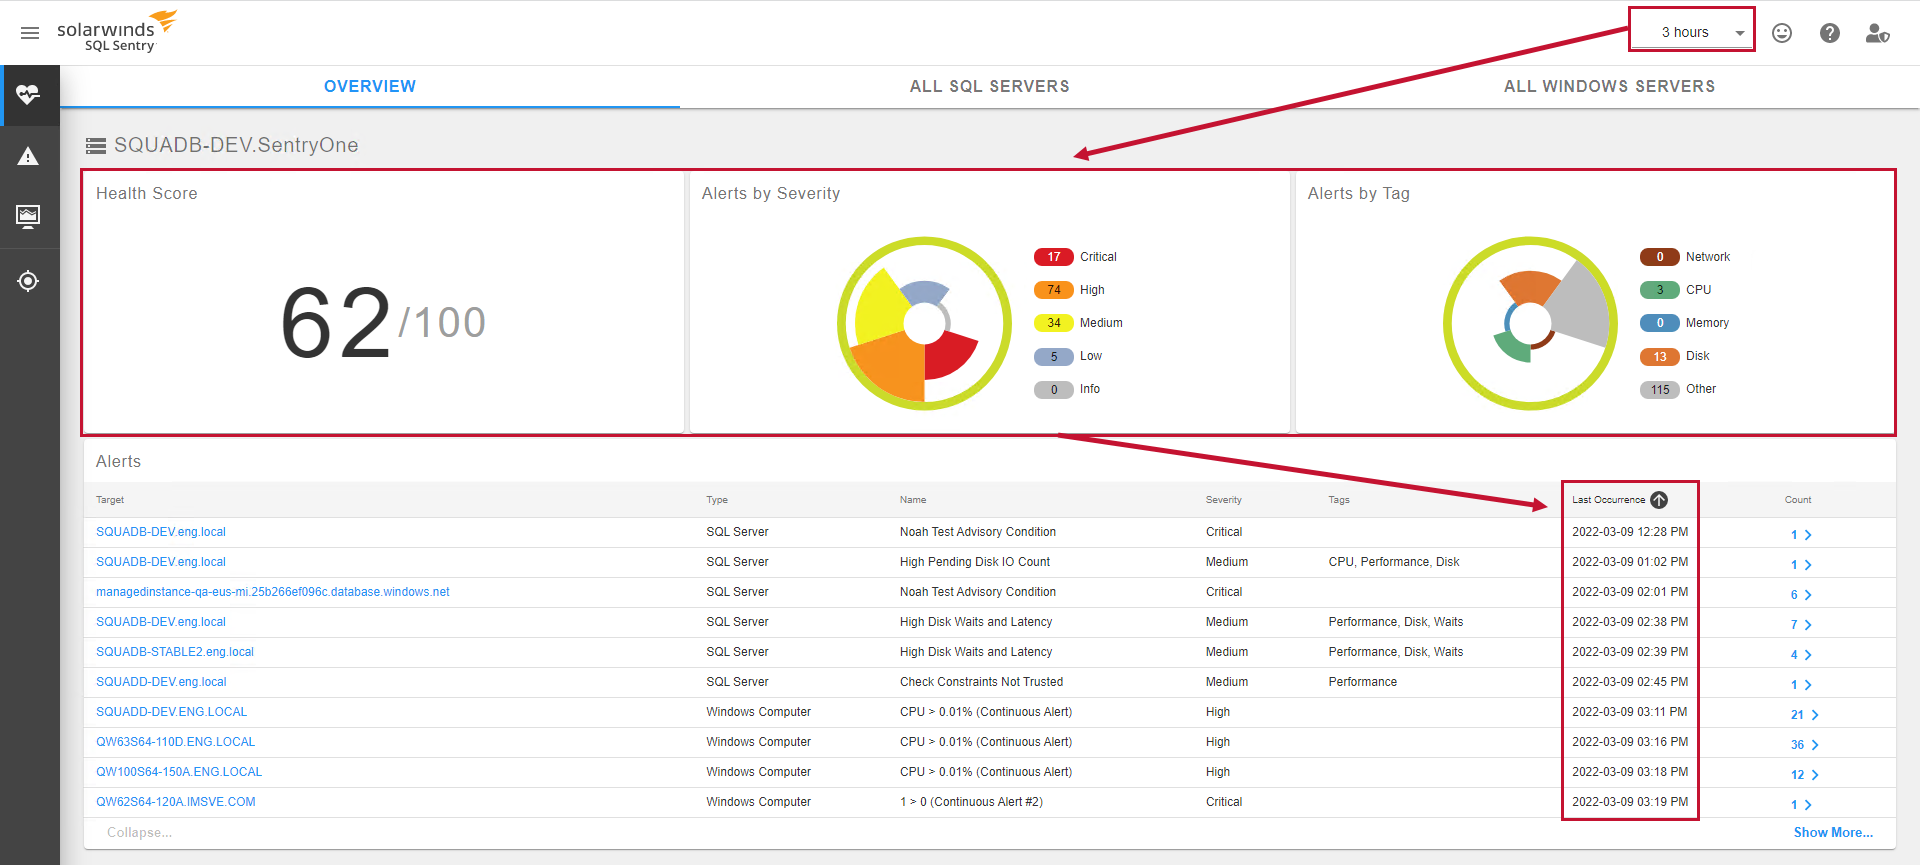 SQL Sentry Portal Environmental Health Overview displaying last 3 hours